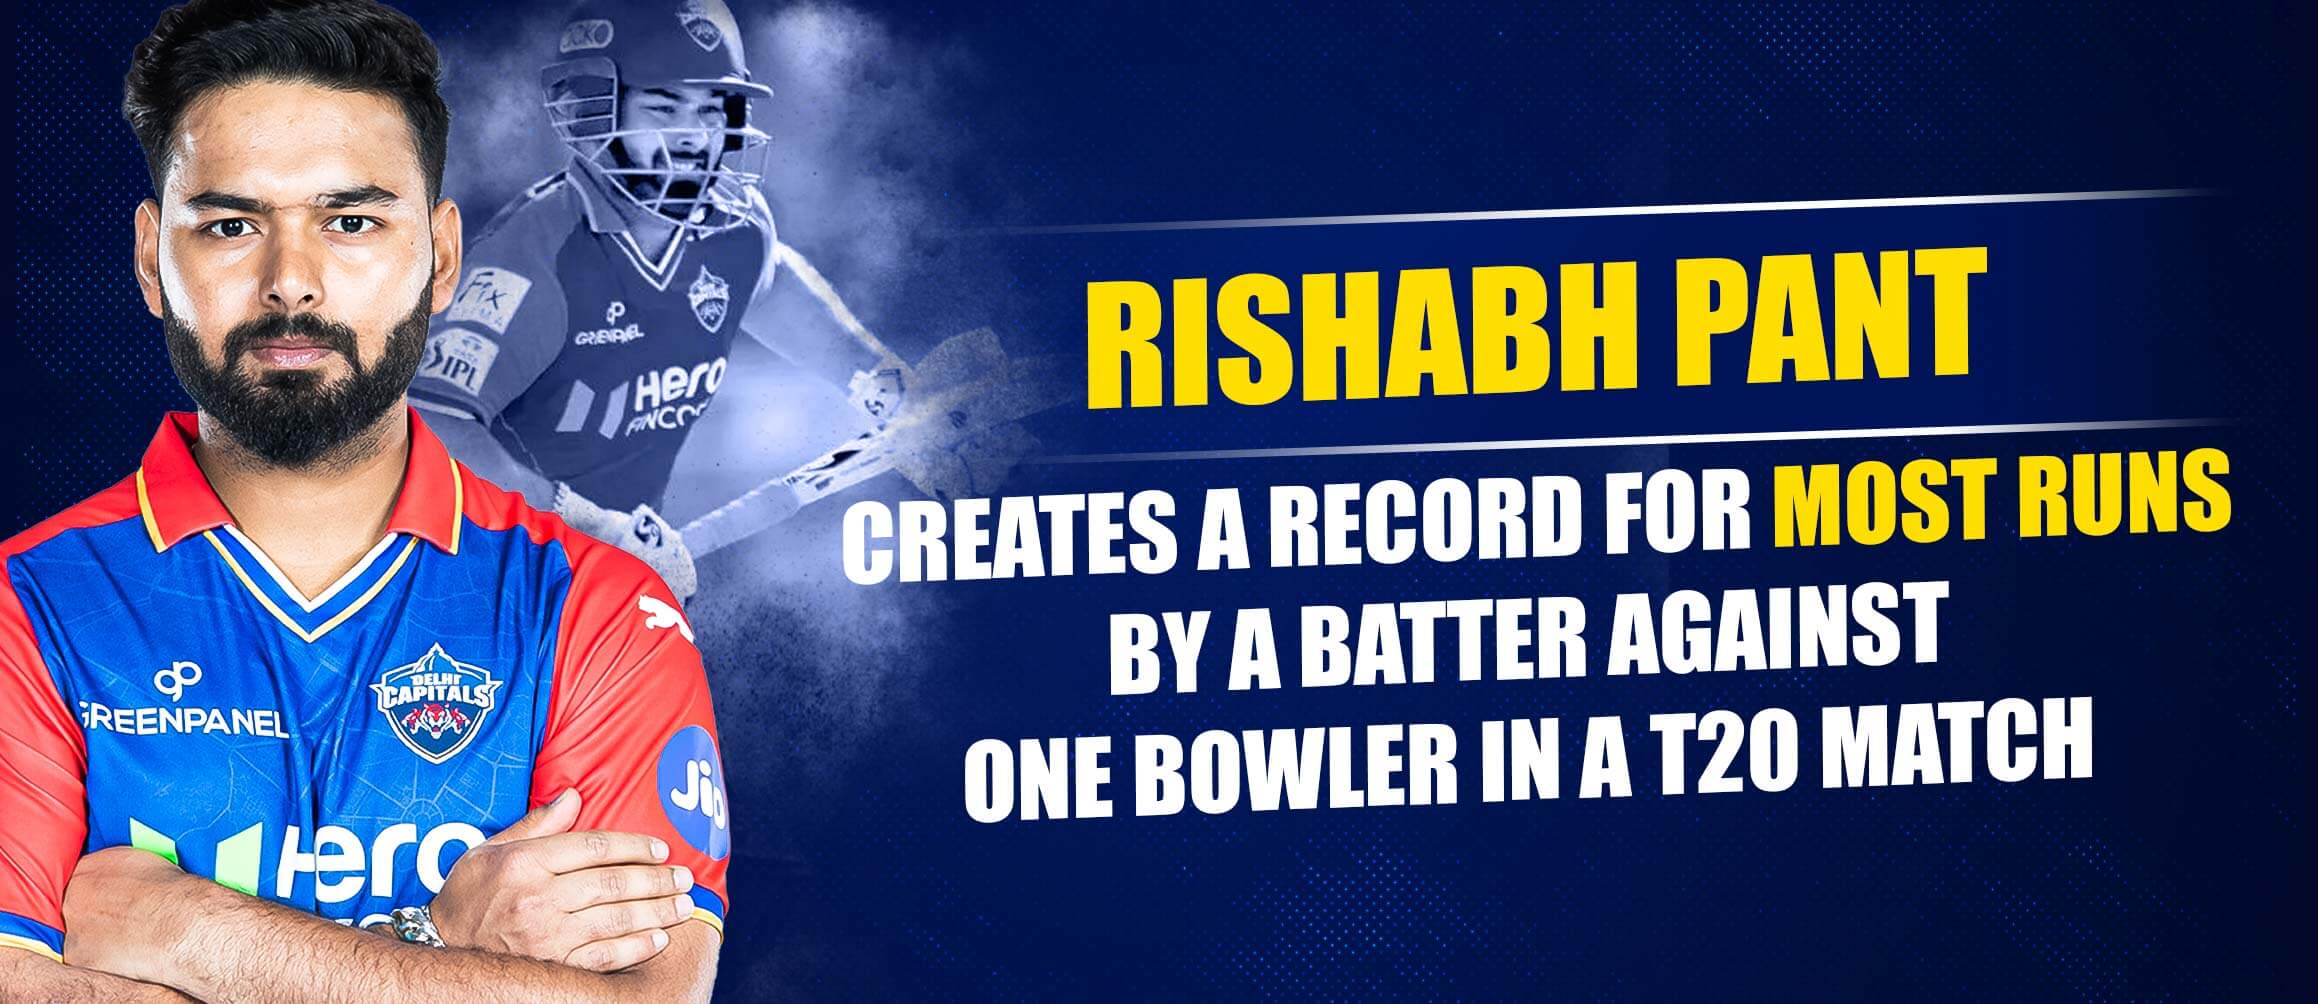 Rishabh Pant creates a record for most runs by a batter against one bowler in a T20 match